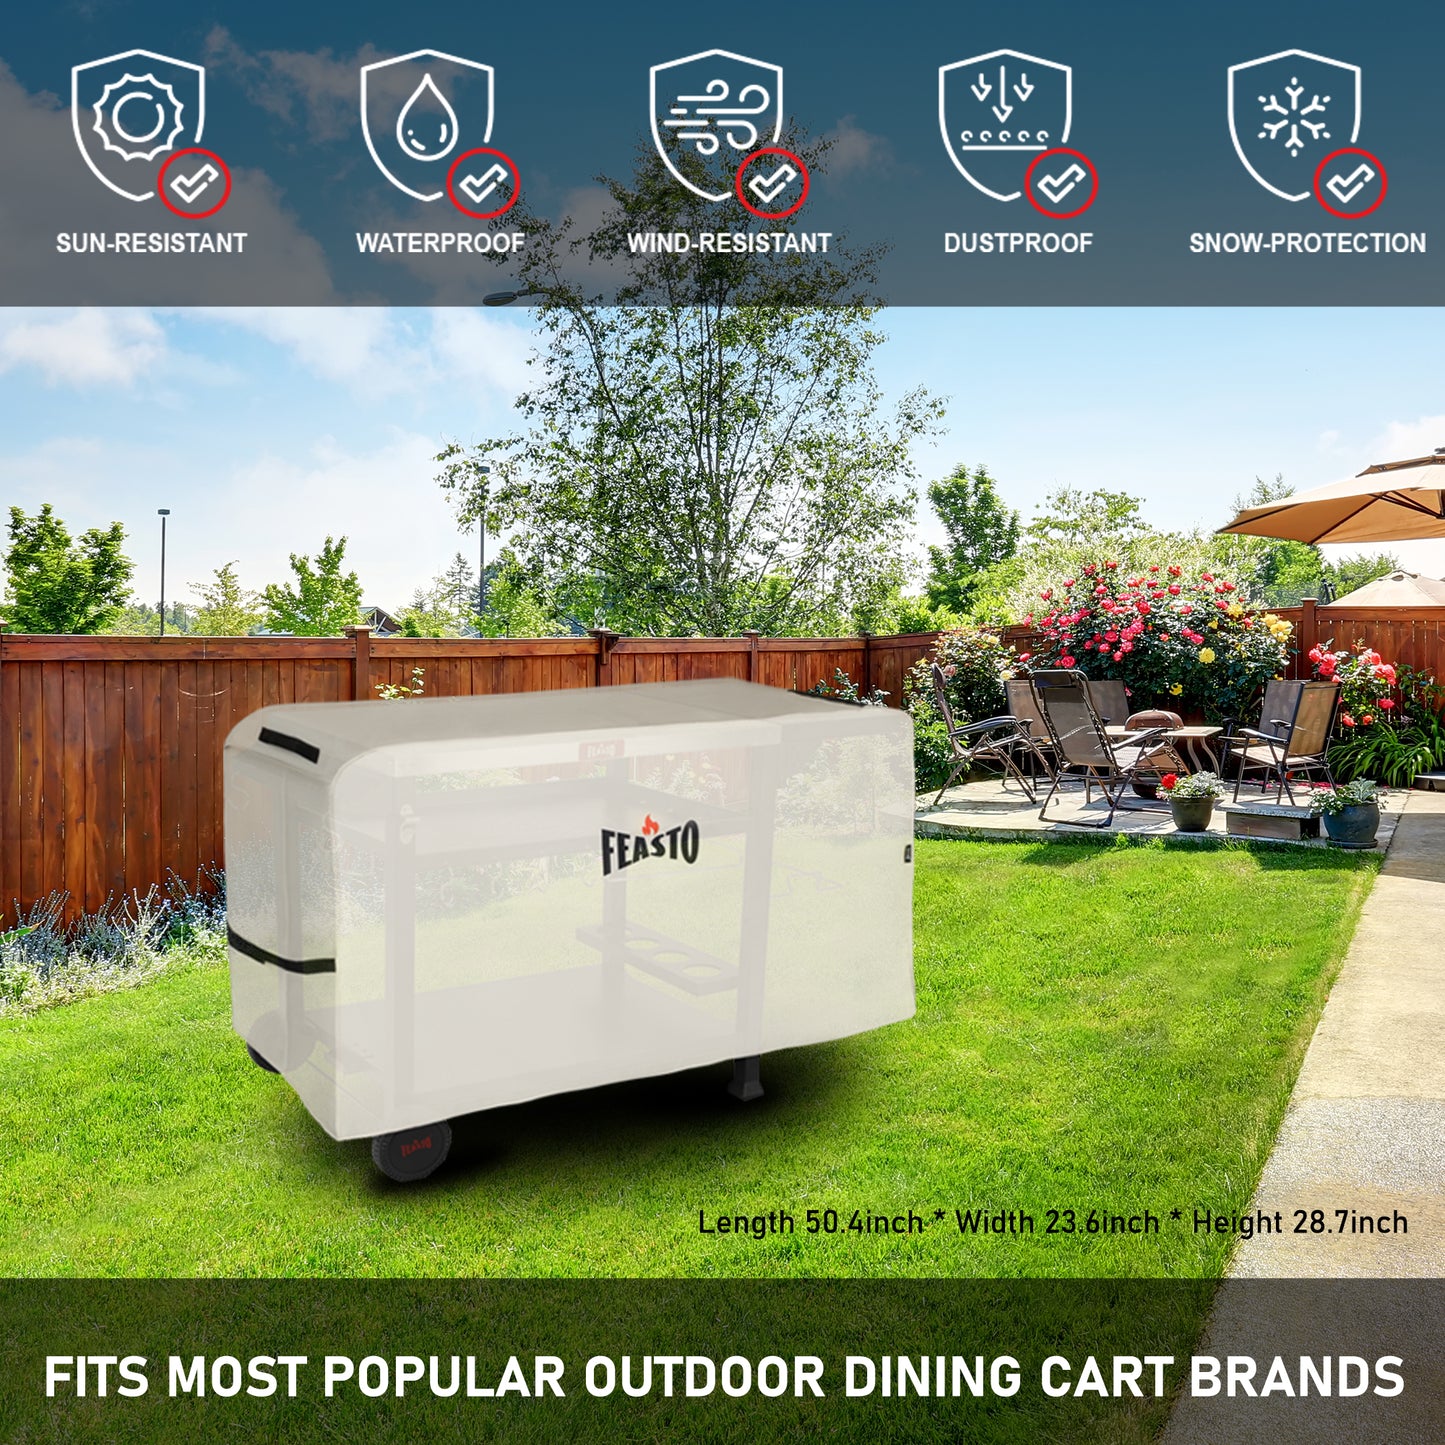 Outdoor Dining Cart Cover for Feasto Three-Shelf Movable Dining Cart Prep Table  Heavy Duty Waterproof Cover for Feasto Dining Cart Beige (L50.4” x W23.6” x H28.7”)